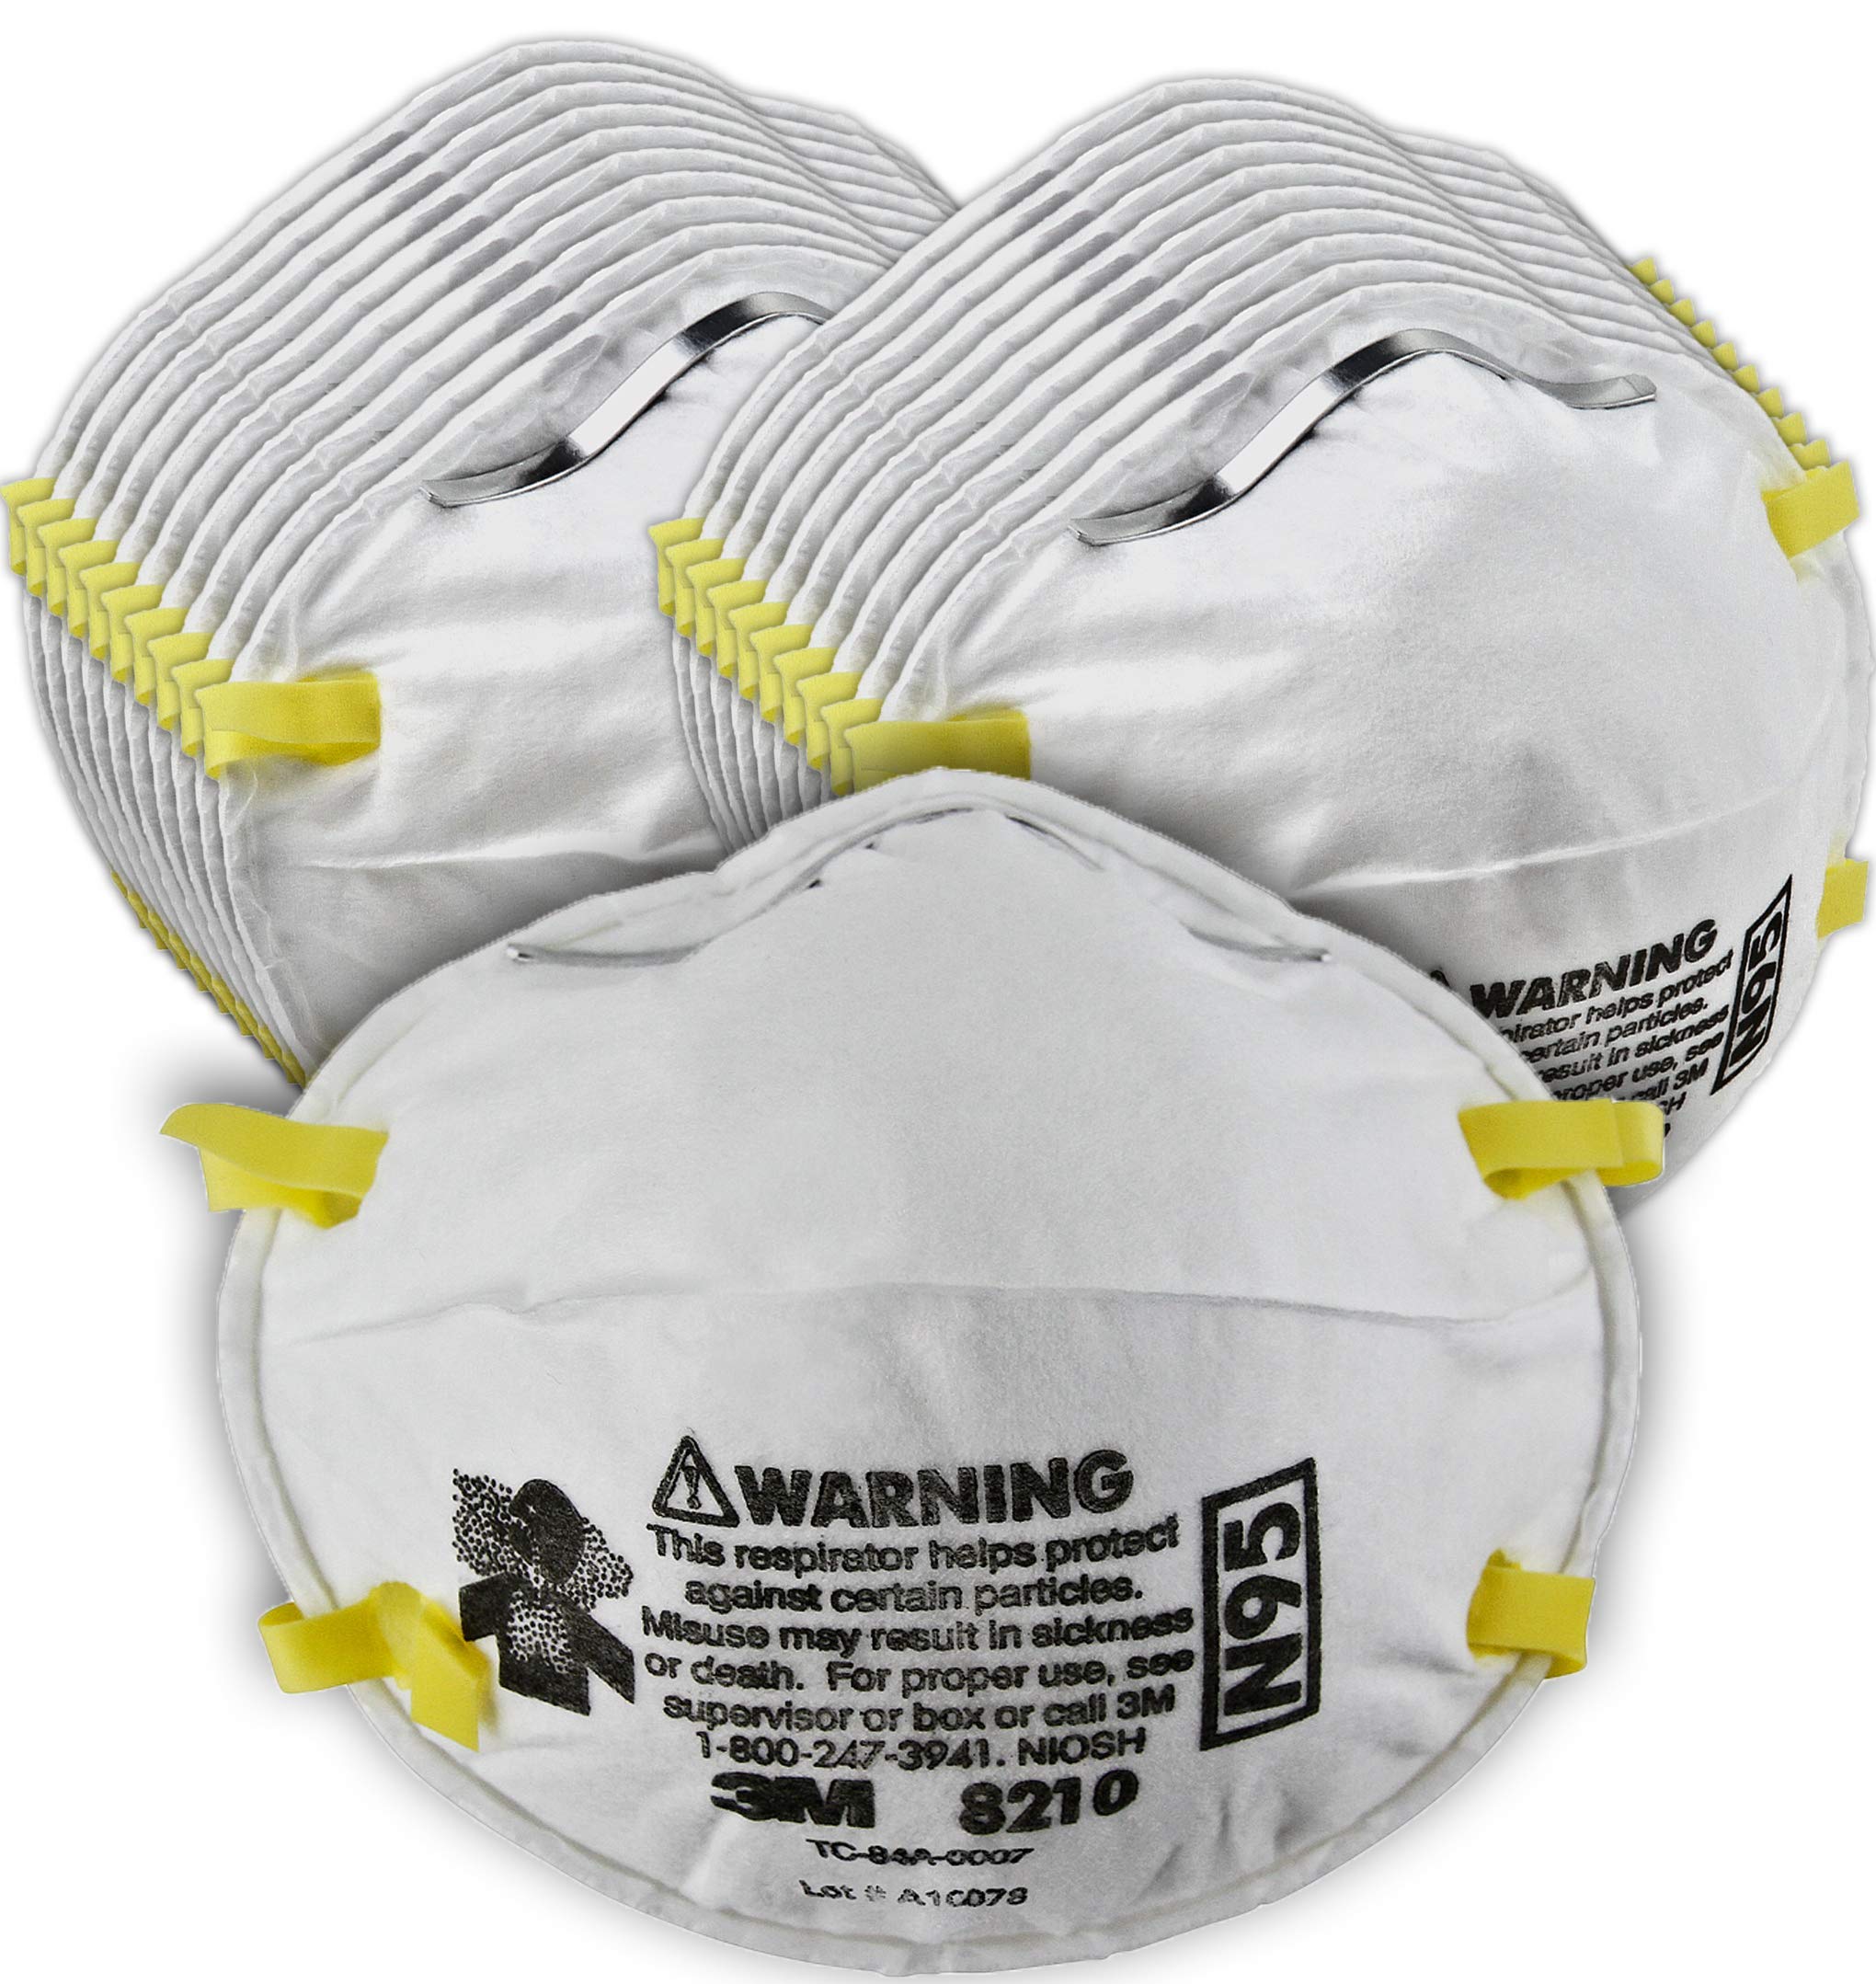 **Price Drop** 20-Count 3M N95 Personal Protective Equipment Particulate Respirator $9.15 + Free Shipping w/ Prime or on $25+